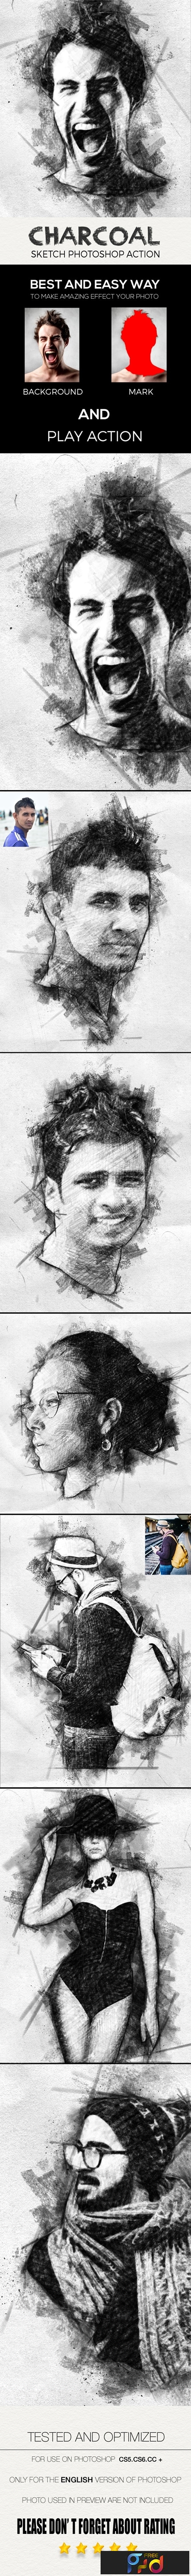 Charcoal Sketch Photoshop Action